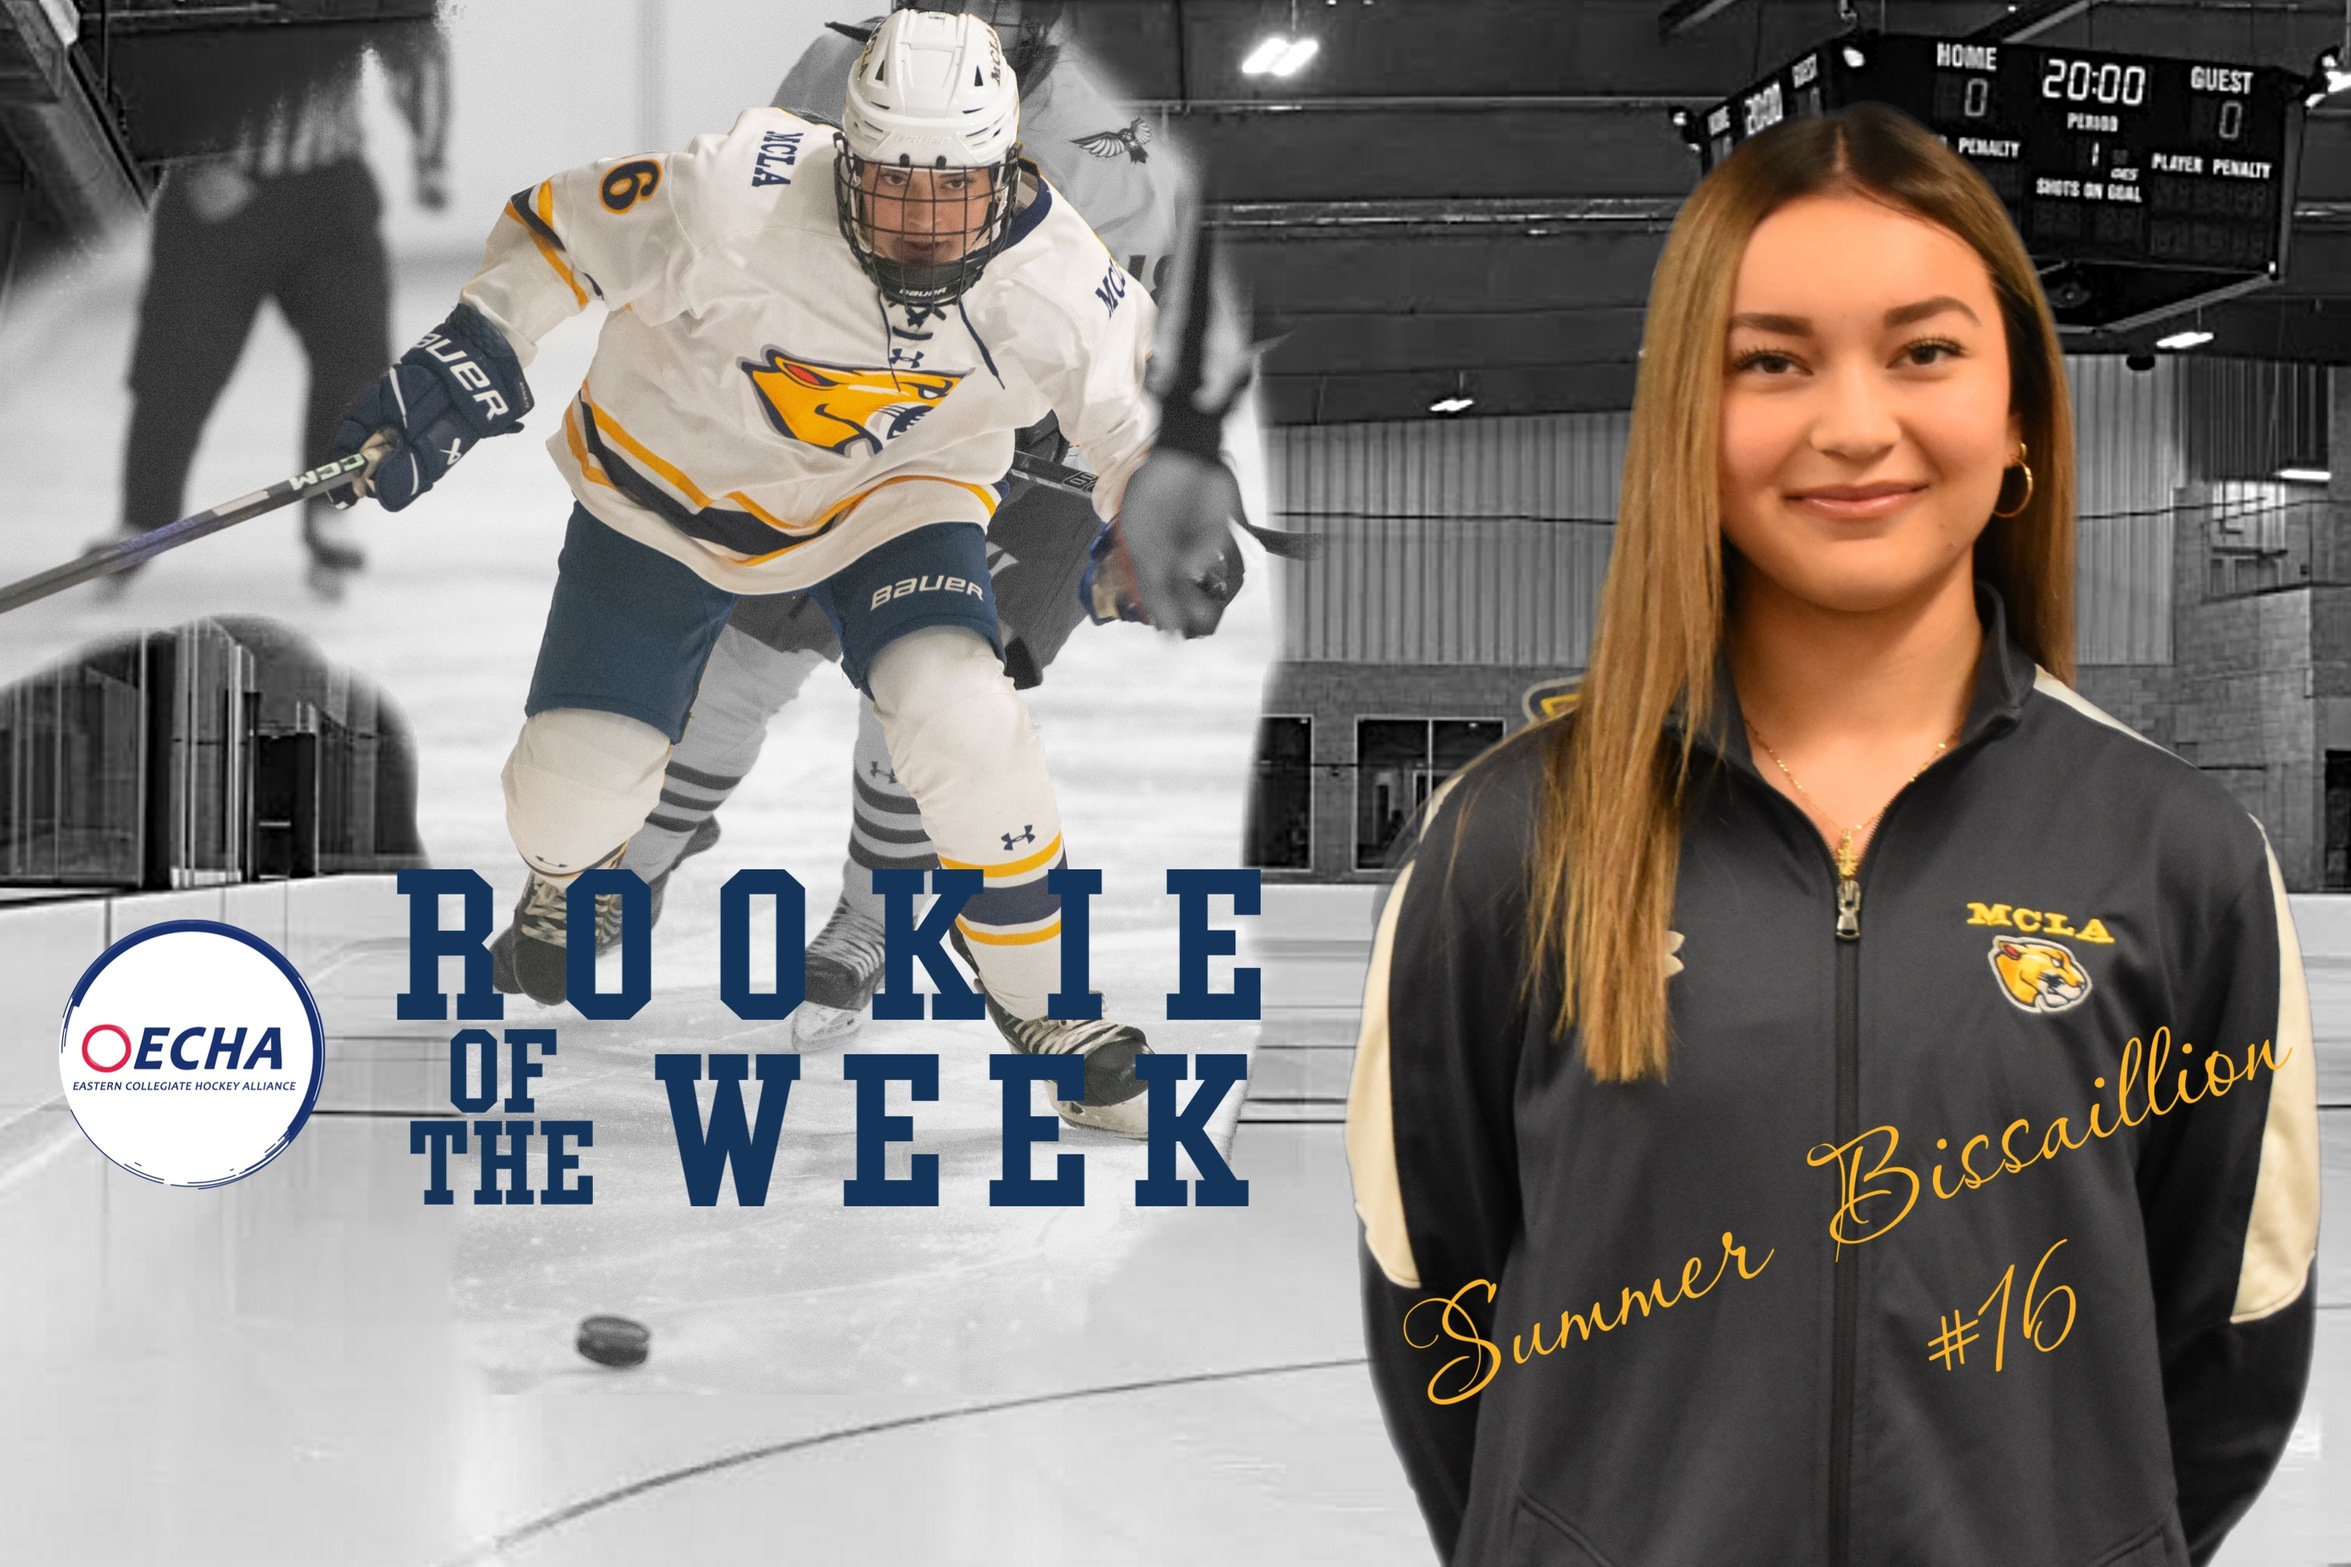 Summer Bissaillion earns ECHA Rookie of the Week.